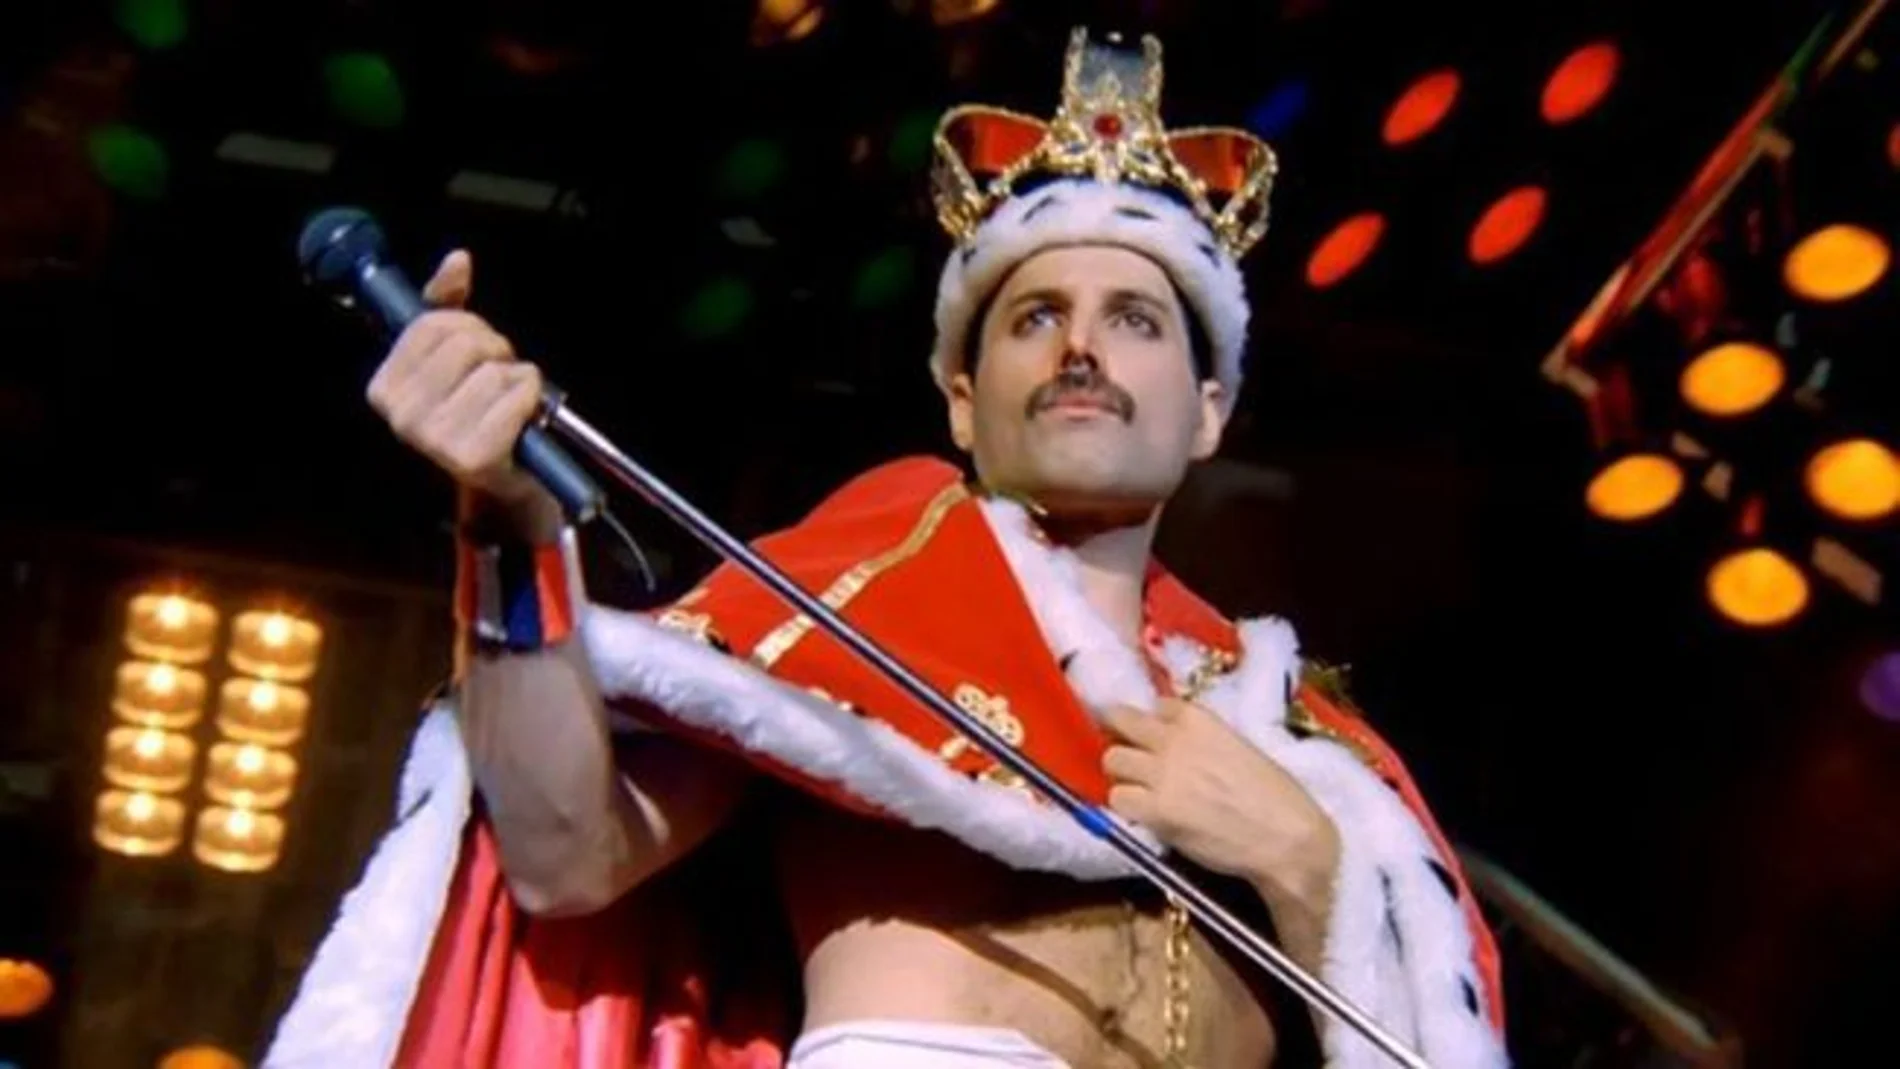 Freddie Mercury on stage wearing a red crown and red cape